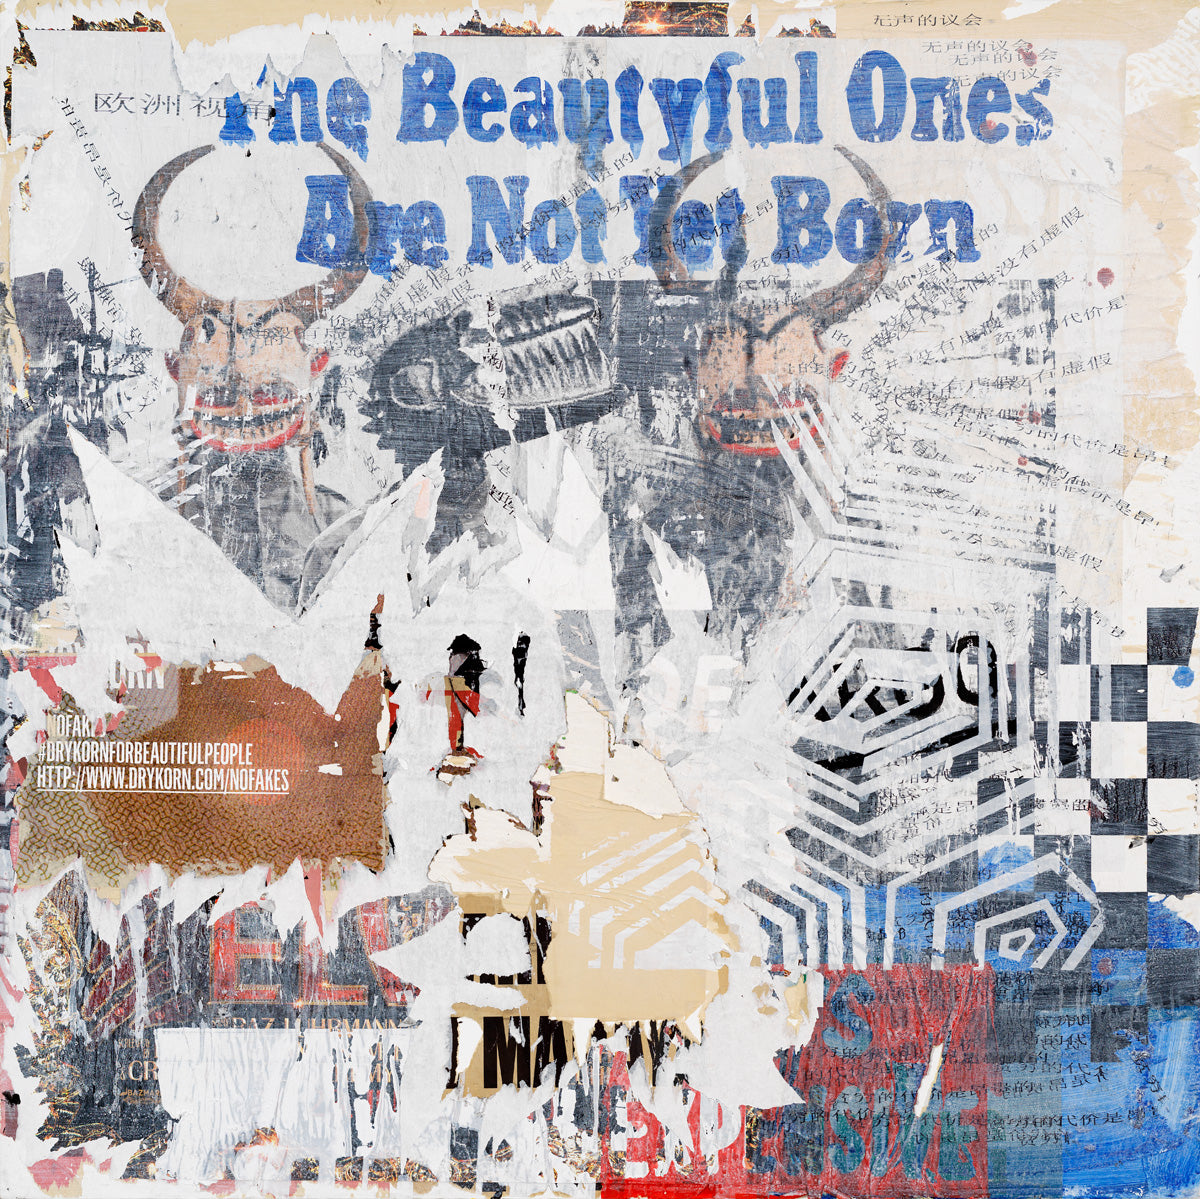 YONAMINE, TBO_ANY_B1 (The beautiful ones are not yet born 1), 2022, Mixed Media and silkscreen on canvas, 120 x 120 cm